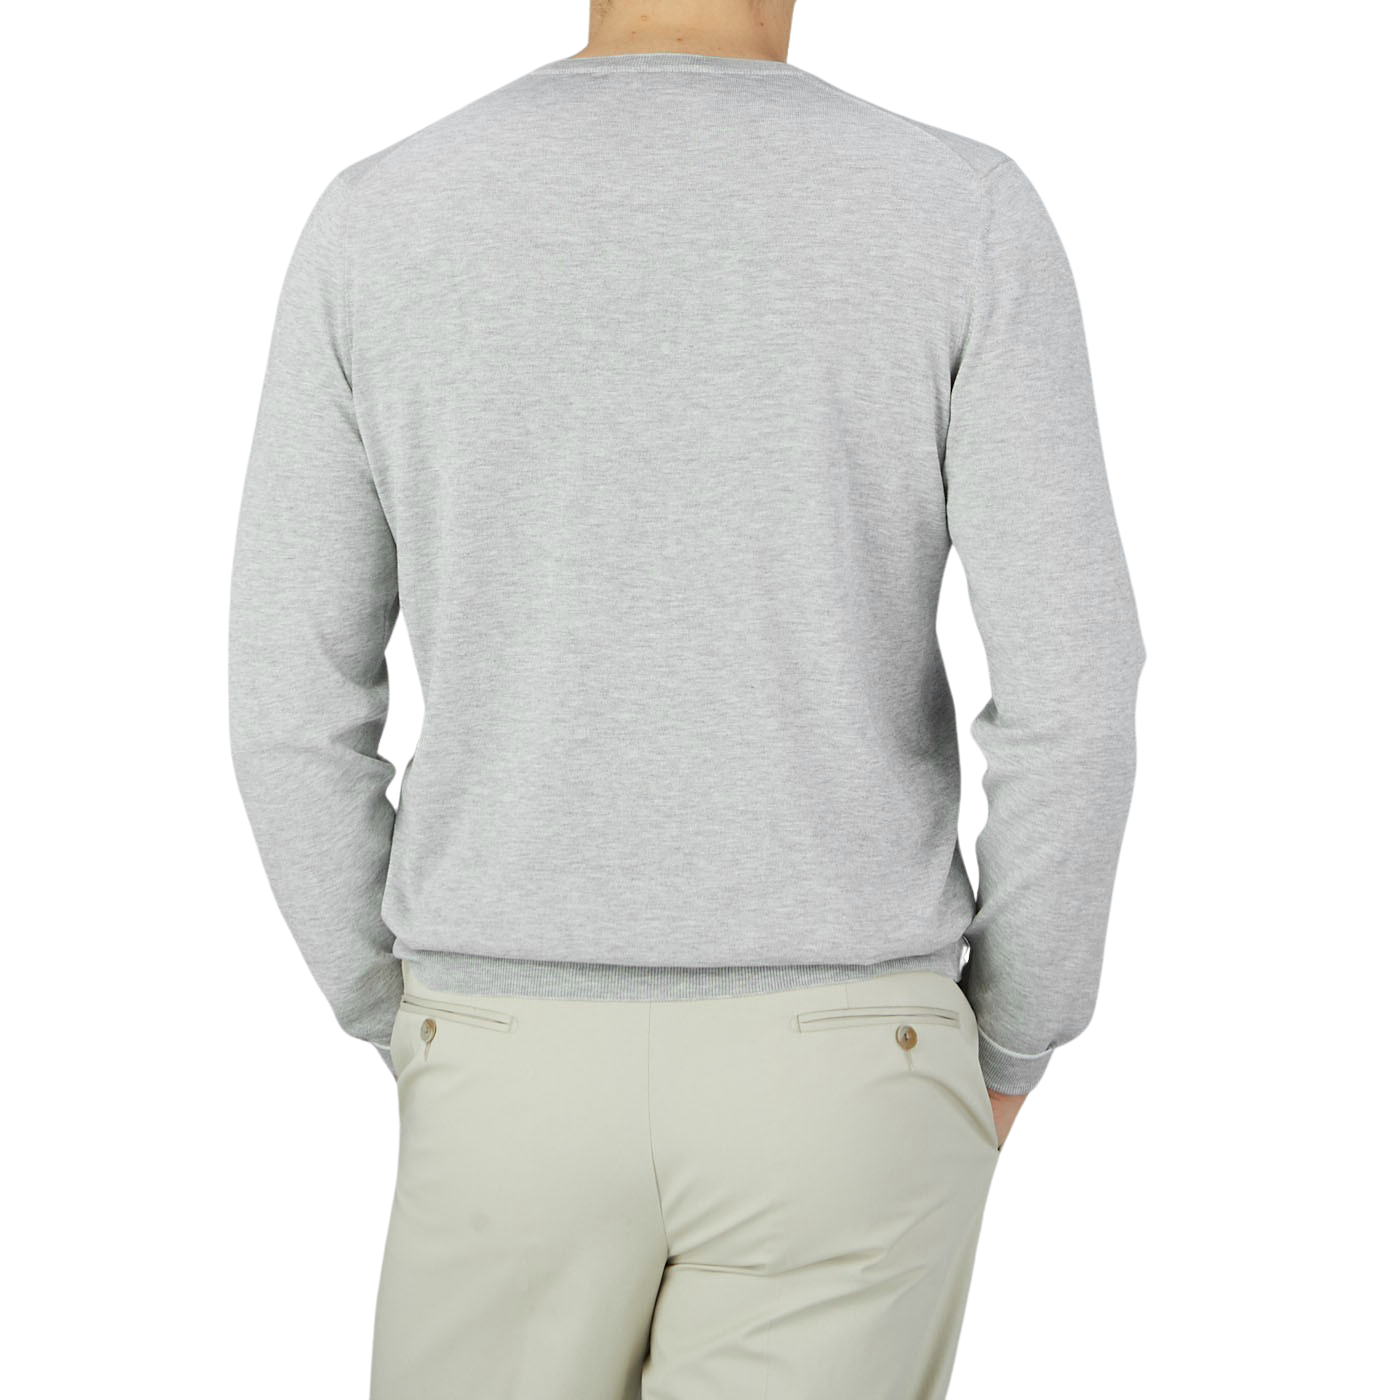 The back view of a man wearing a Gran Sasso Silver Grey Silk Cotton Crewneck Sweater and tan pants, perfect for the summer version.